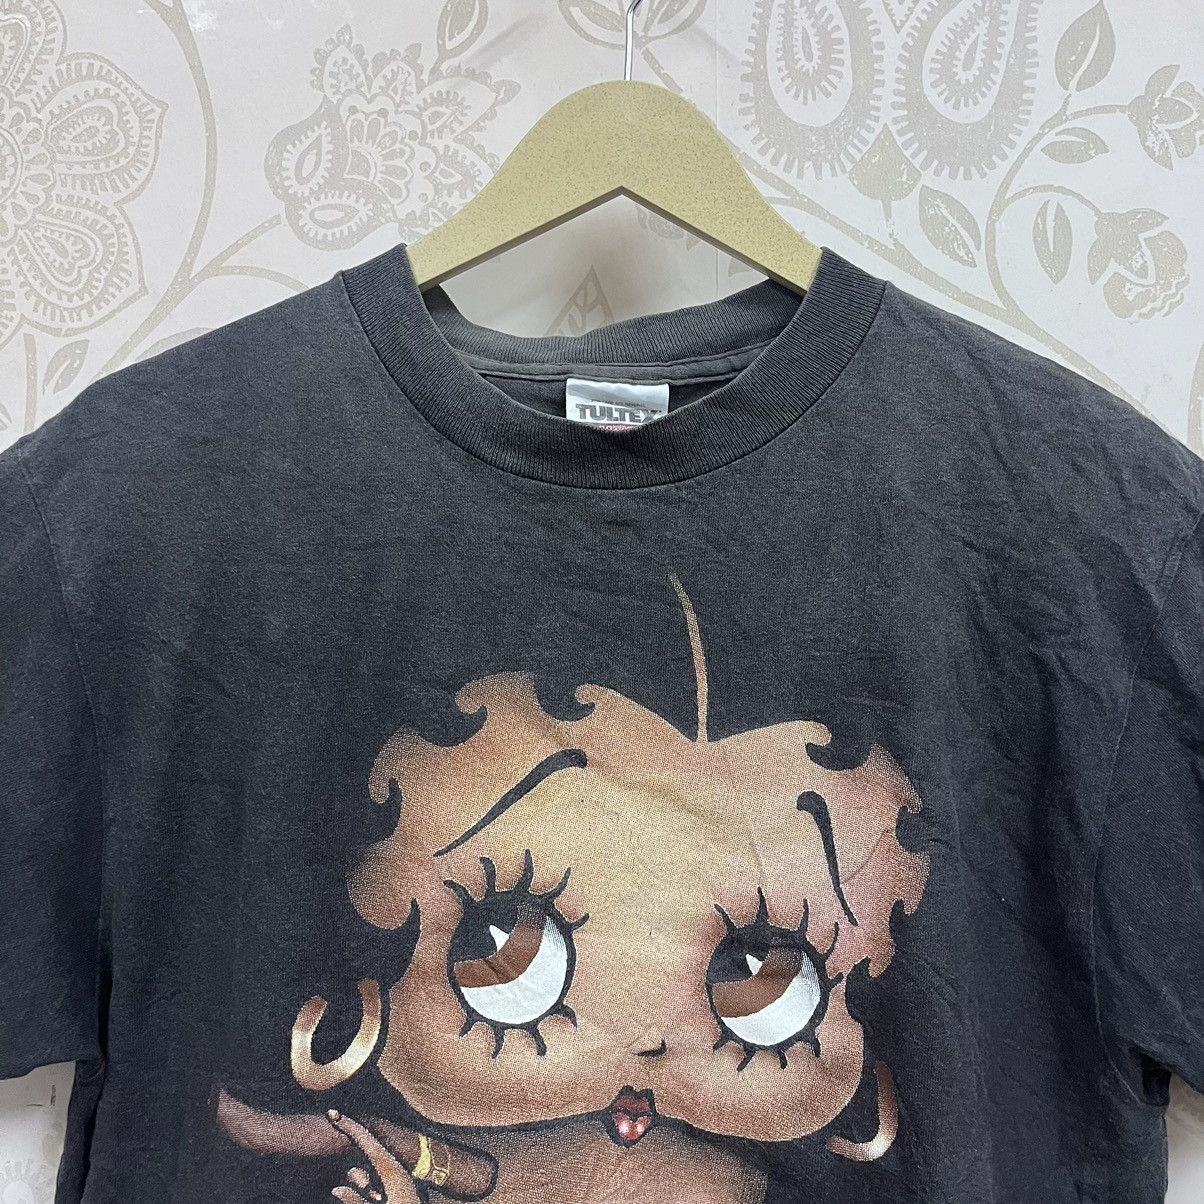 Vintage 1997 Betty Boop King Features TShirt USA - 16